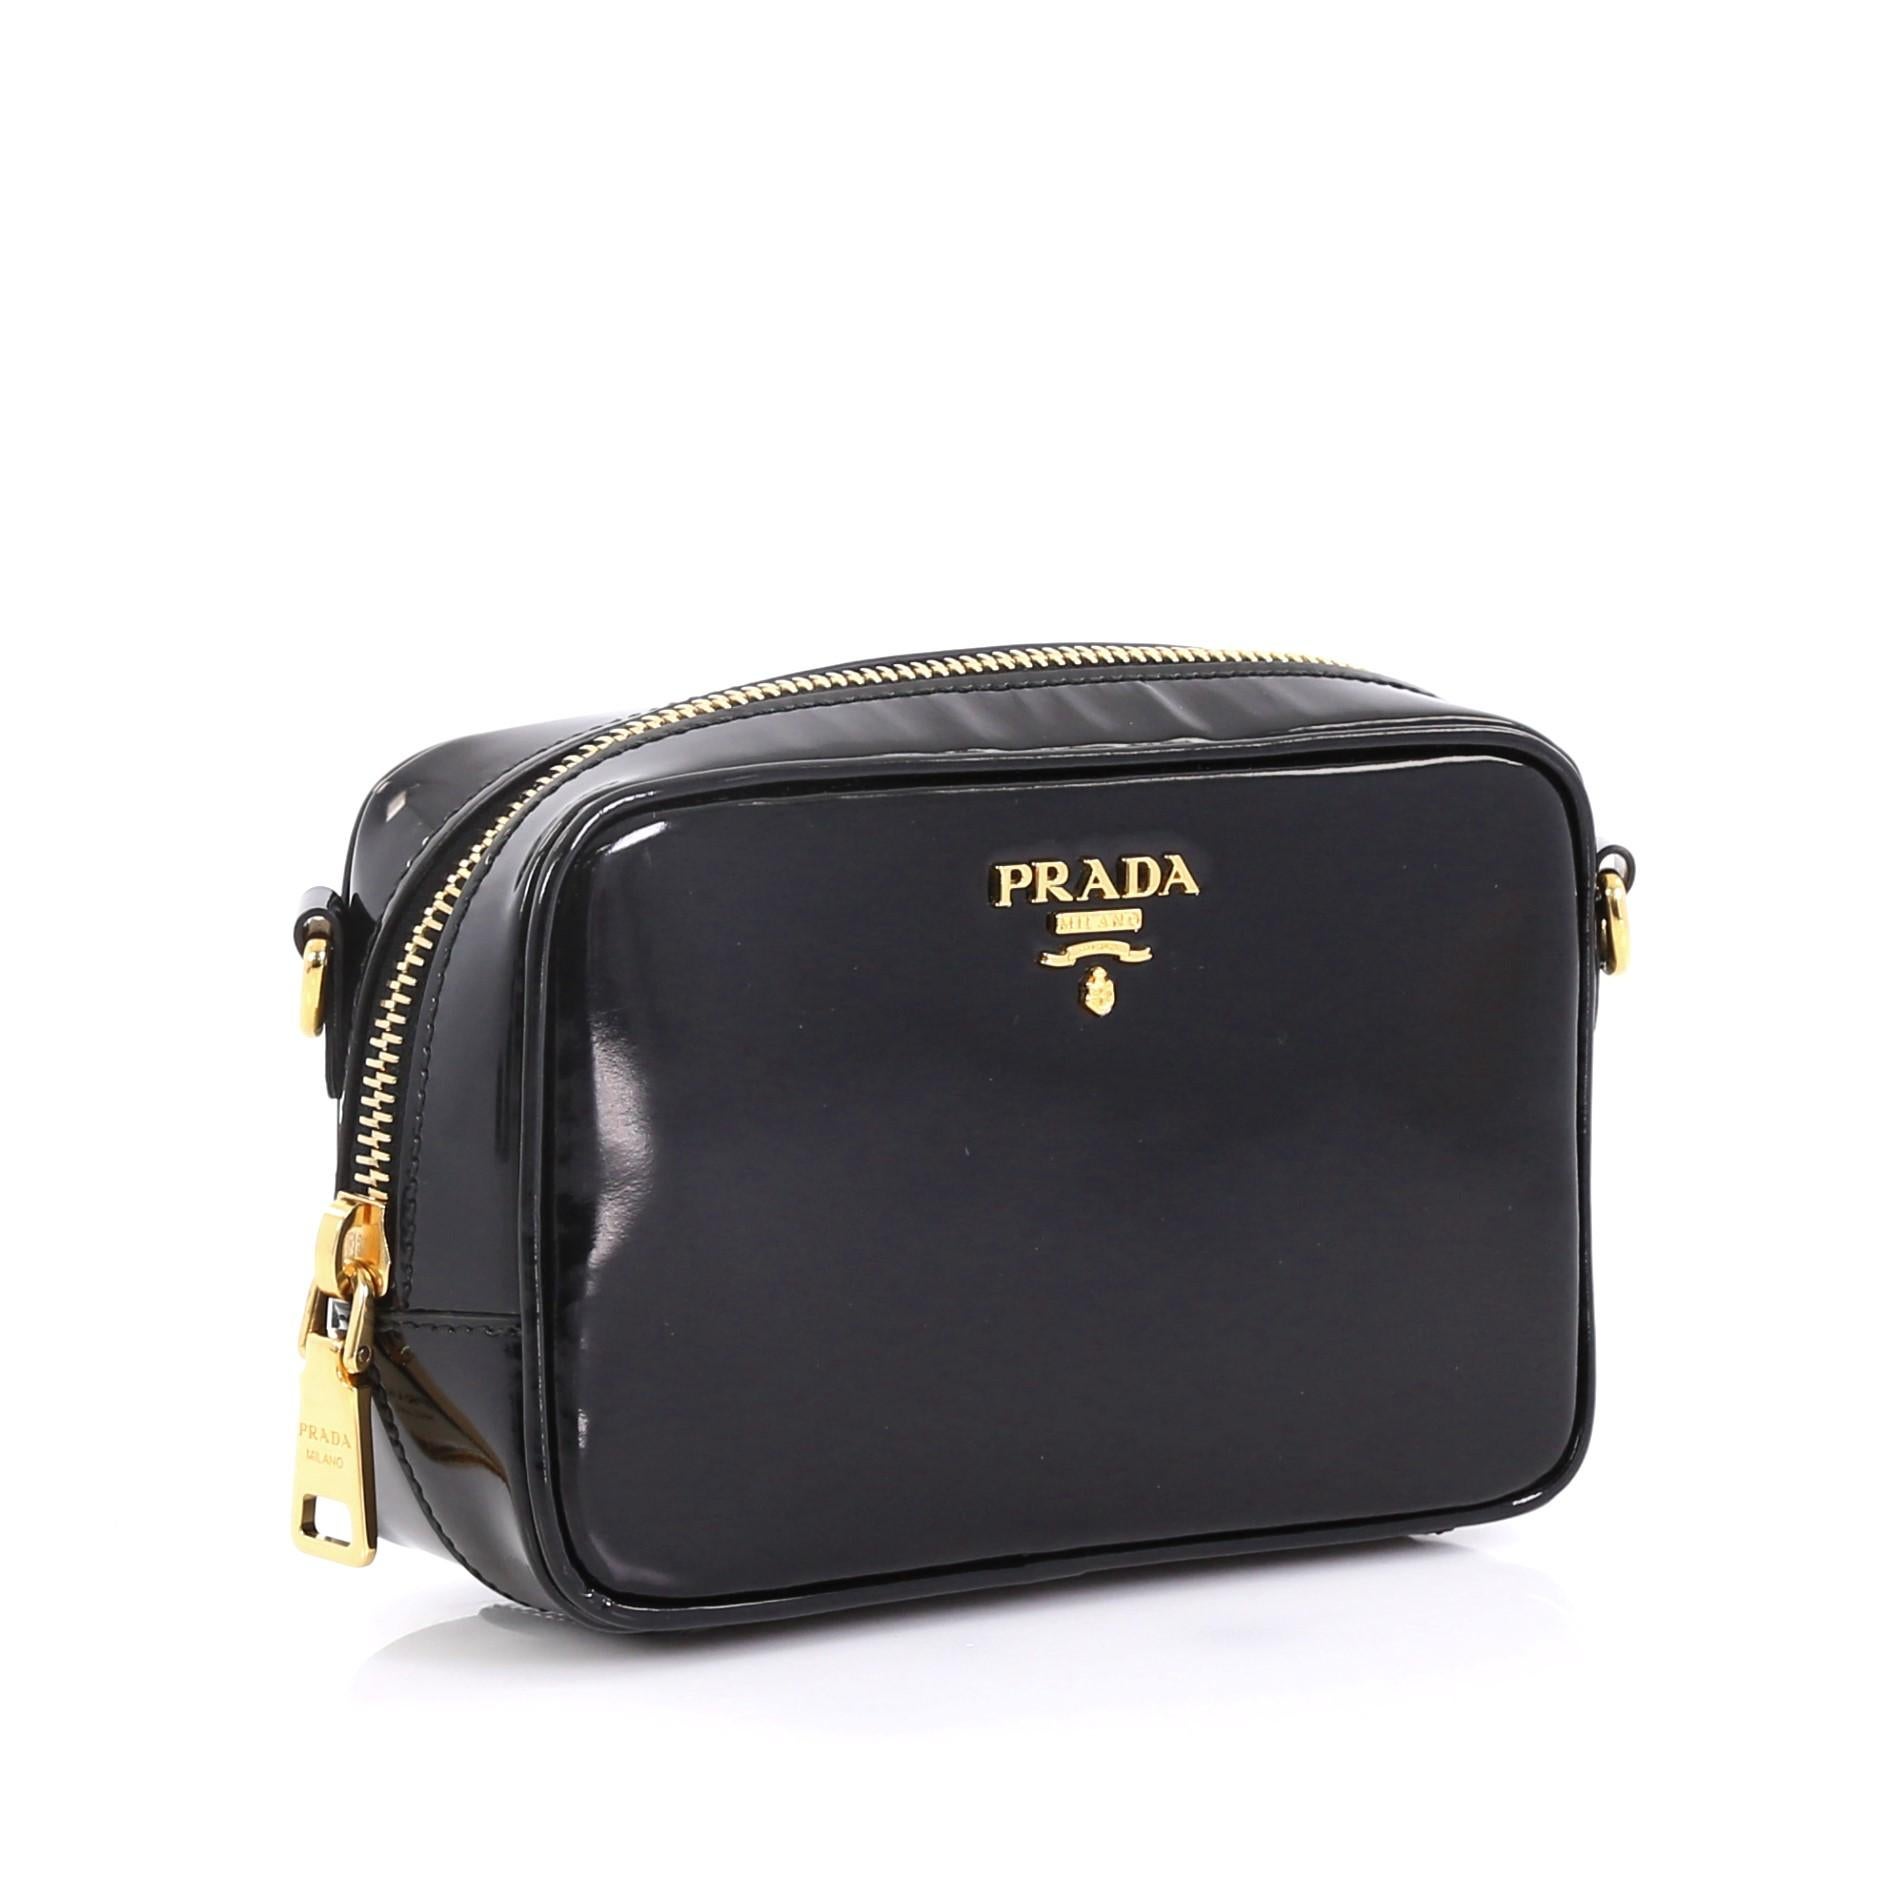 This Prada Zip Crossbody Bag Spazzolato Leather Mini, crafted in black spazzolato leather, features an adjustable leather strap, signature Prada logo, and gold-tone hardware. Its zip closure opens to a black fabric interior with slip pockets.